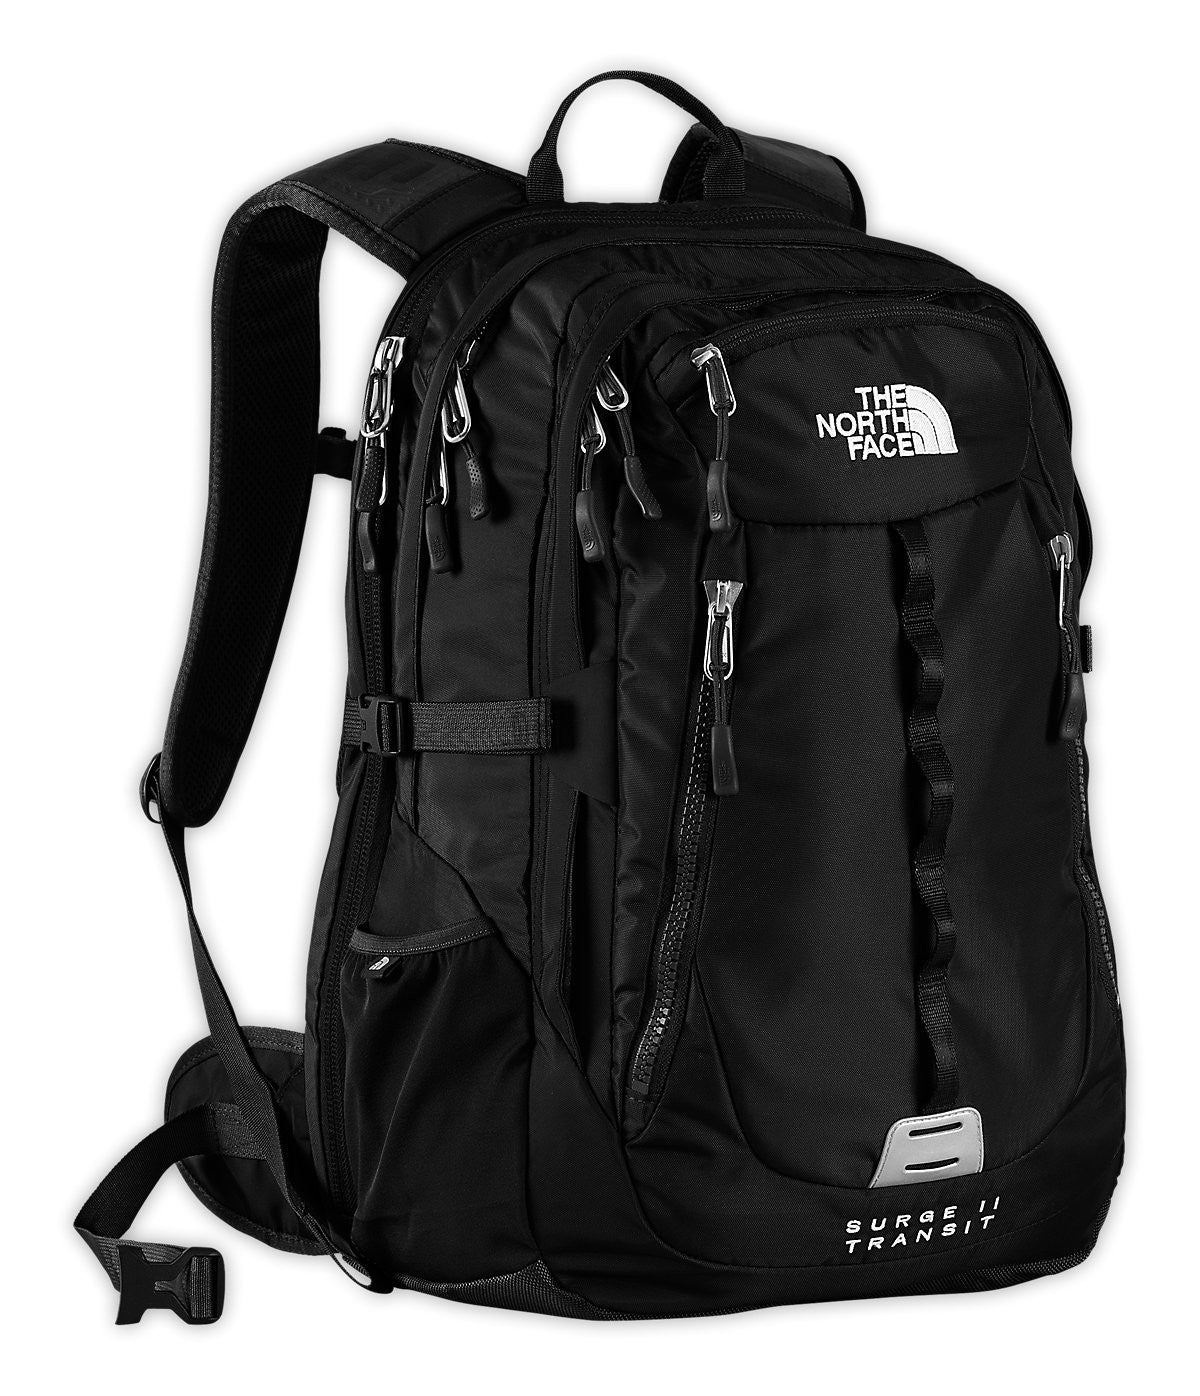 The North Face Surge II Transit – – Superior Quality Skin & Hair Care